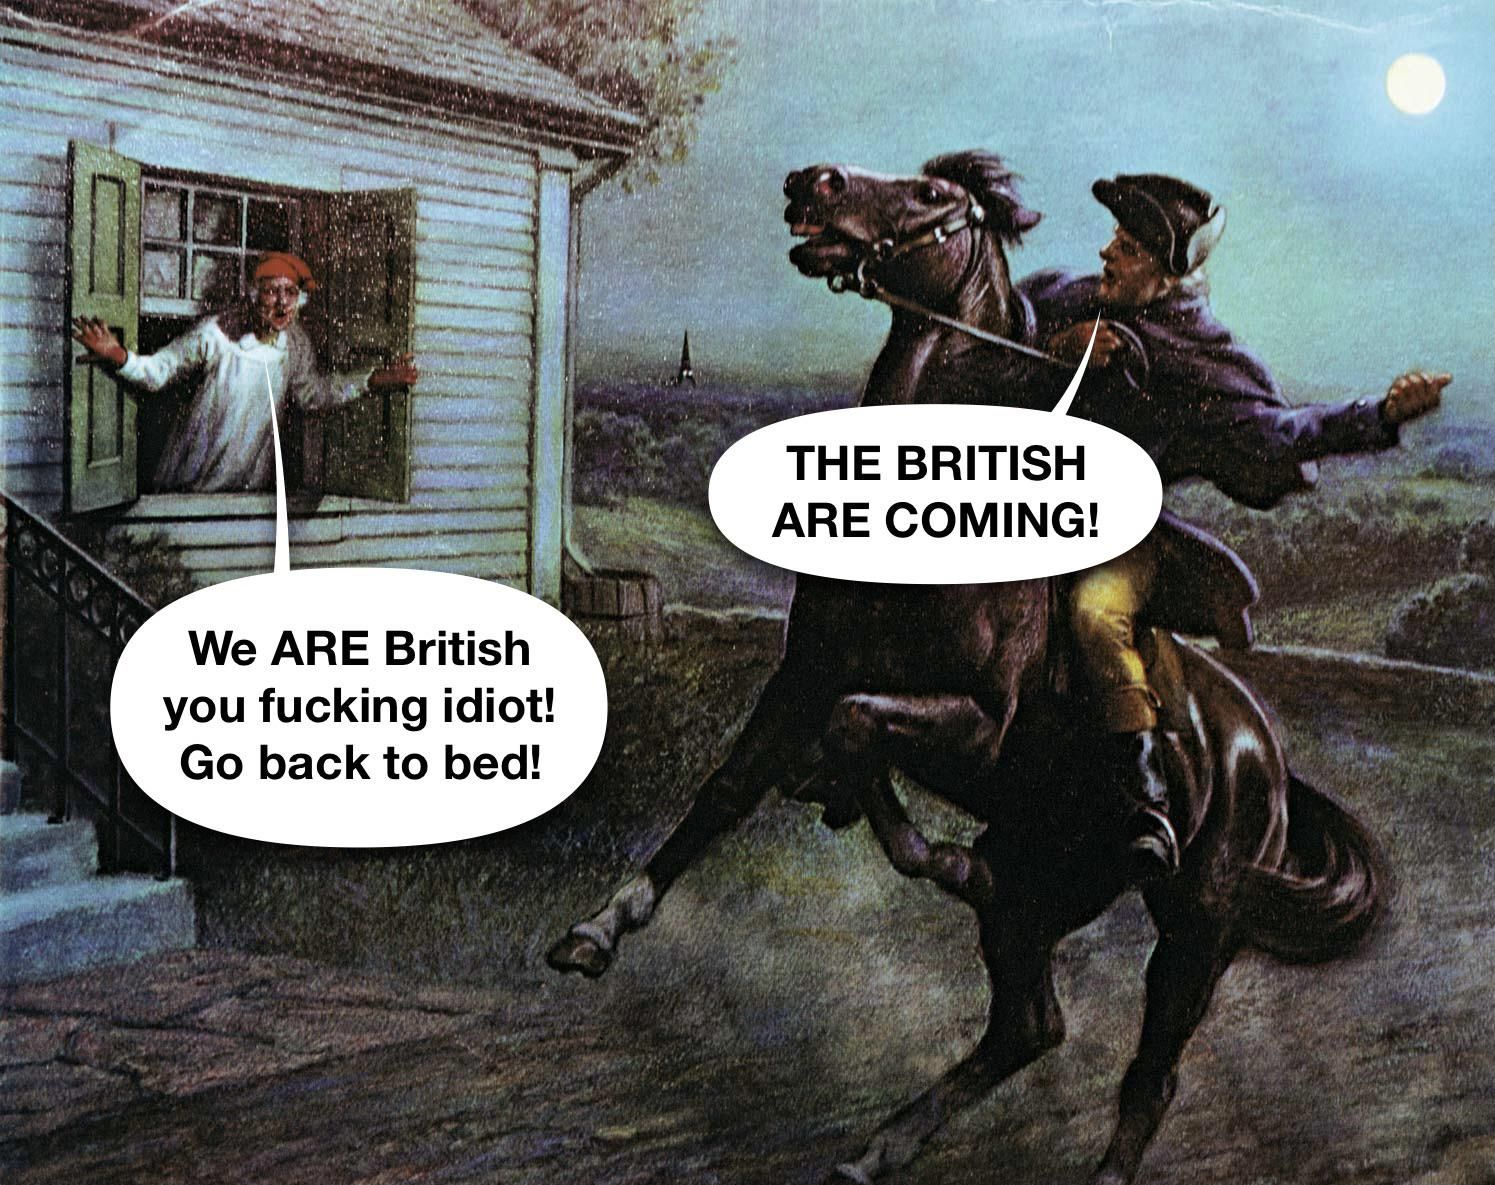 Since the American colonials were themselves British subjects it’s more likely Paul Reverse and the other riders said “the regulars/redcoats are coming” instead